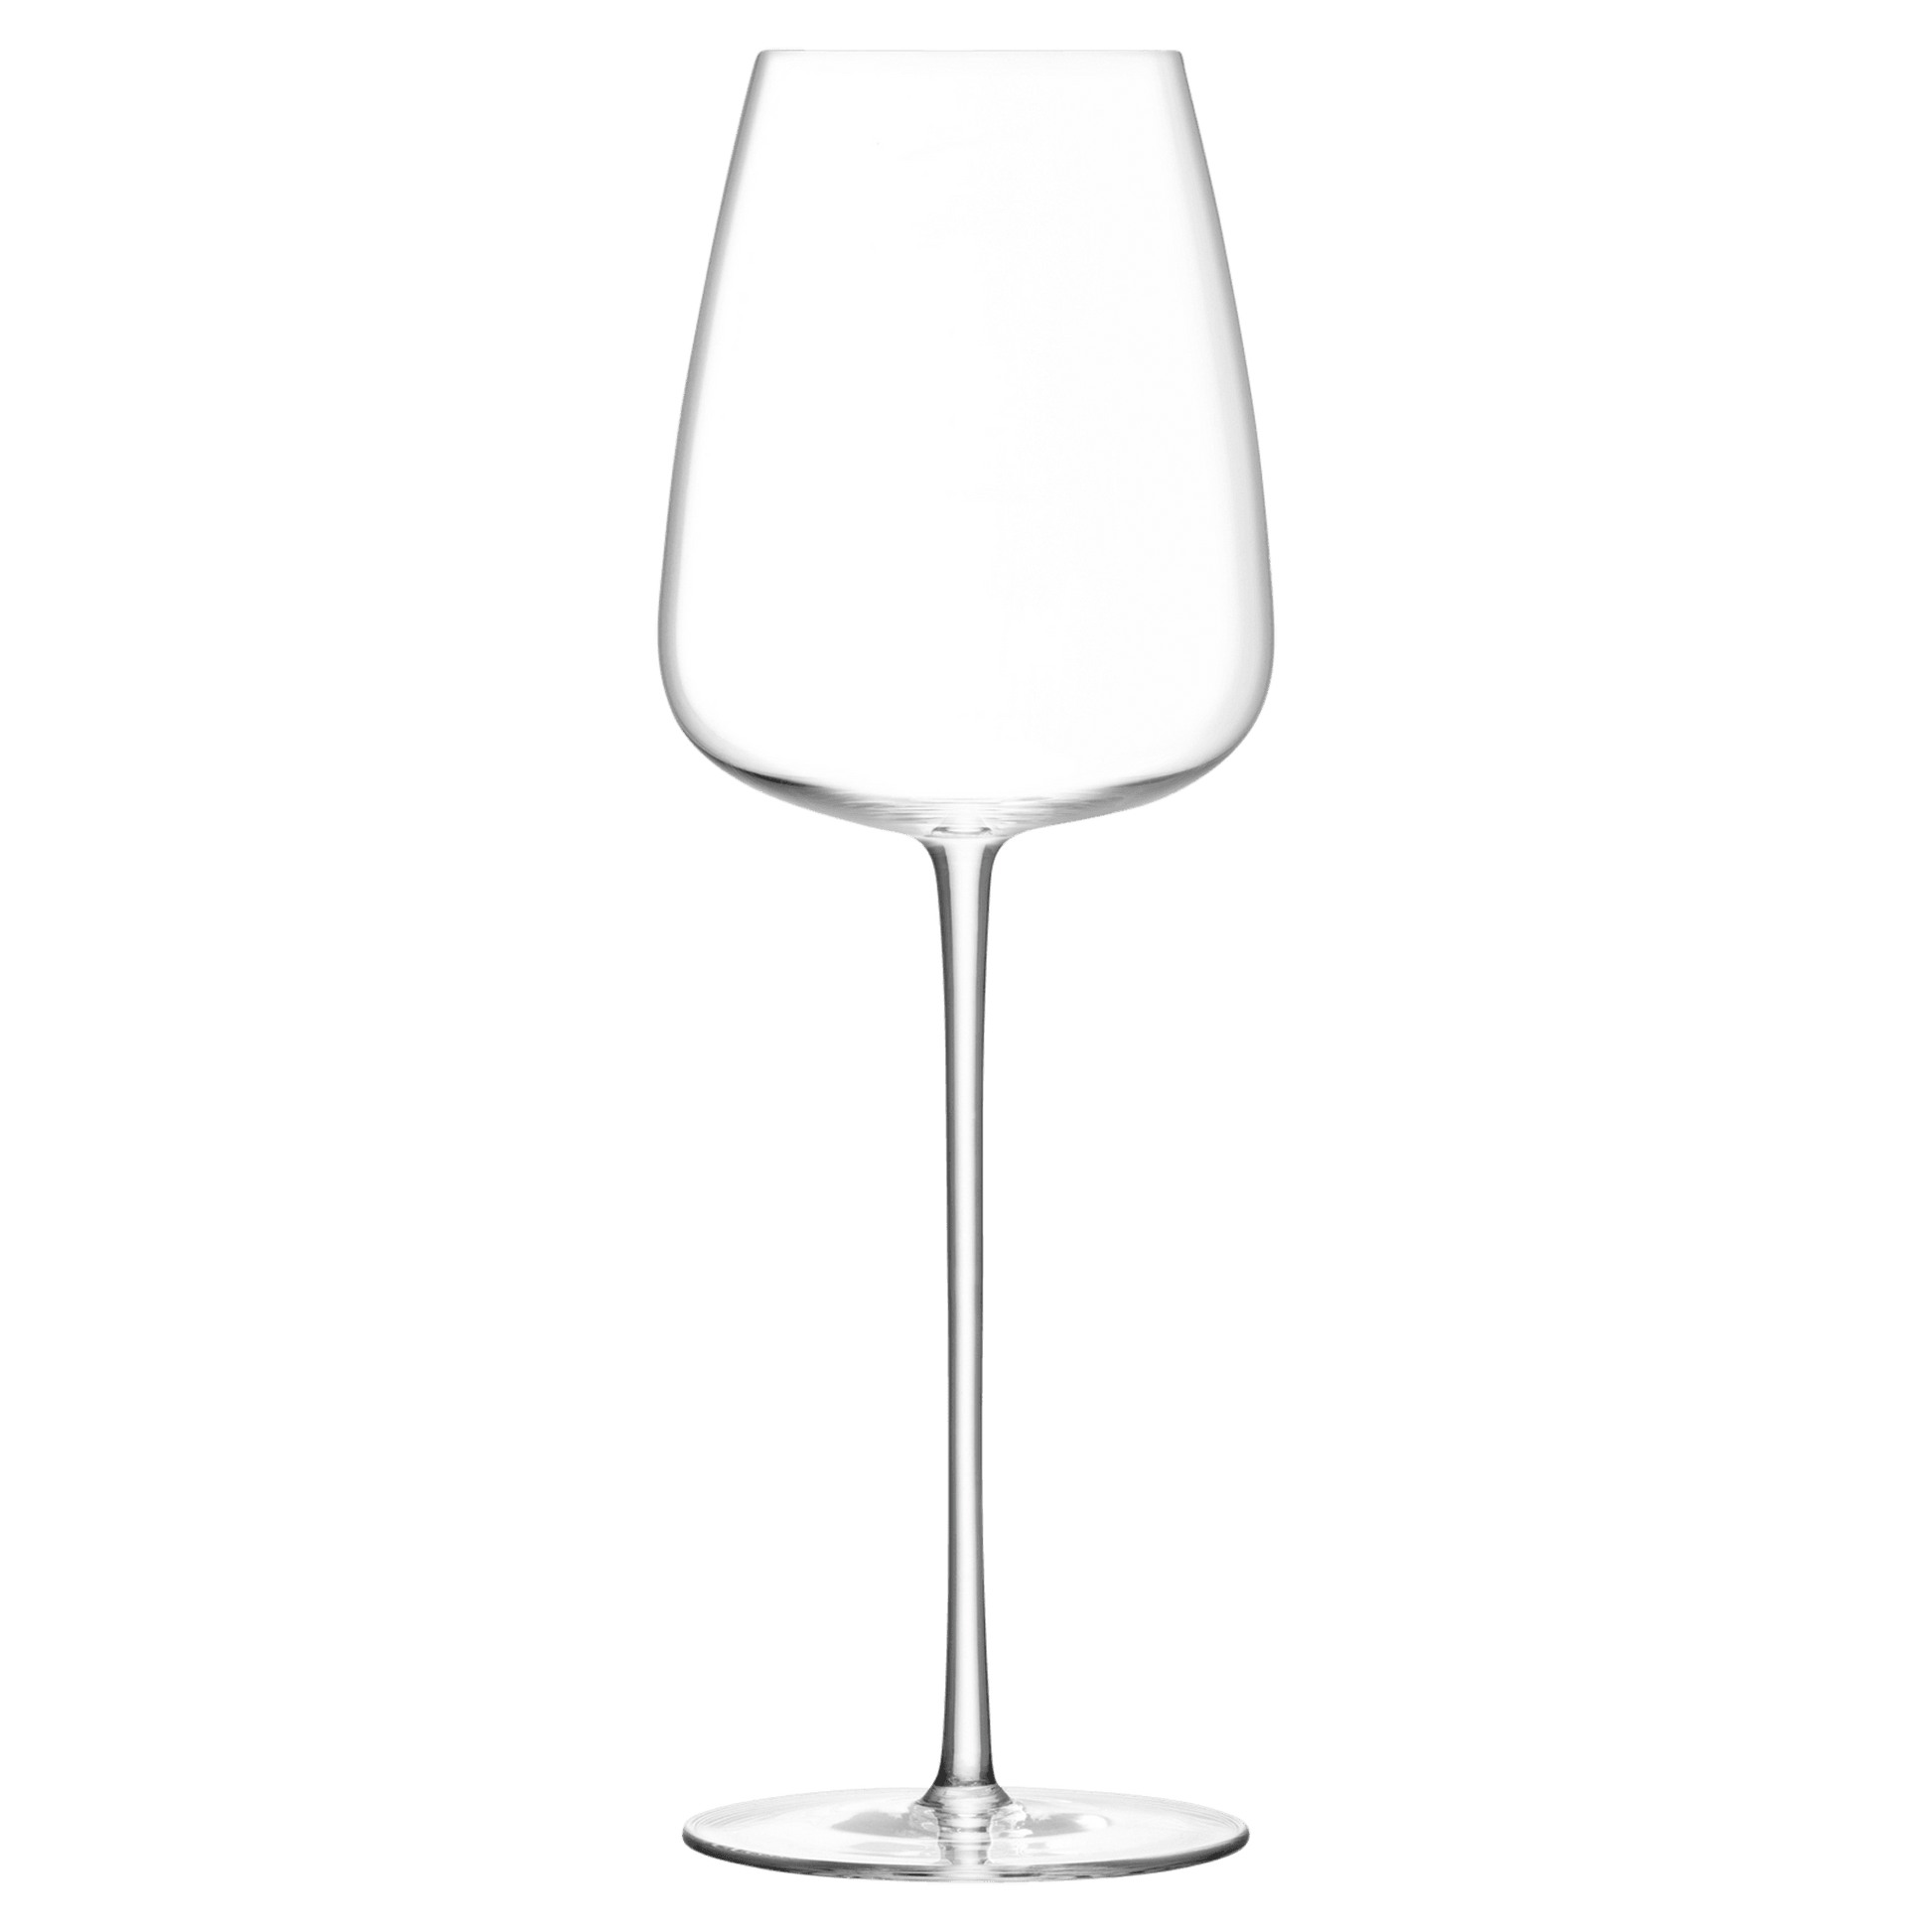 Wine Culture Mouth Blown White Wine Glass Set of Two - Bilden Home & Hardware Market